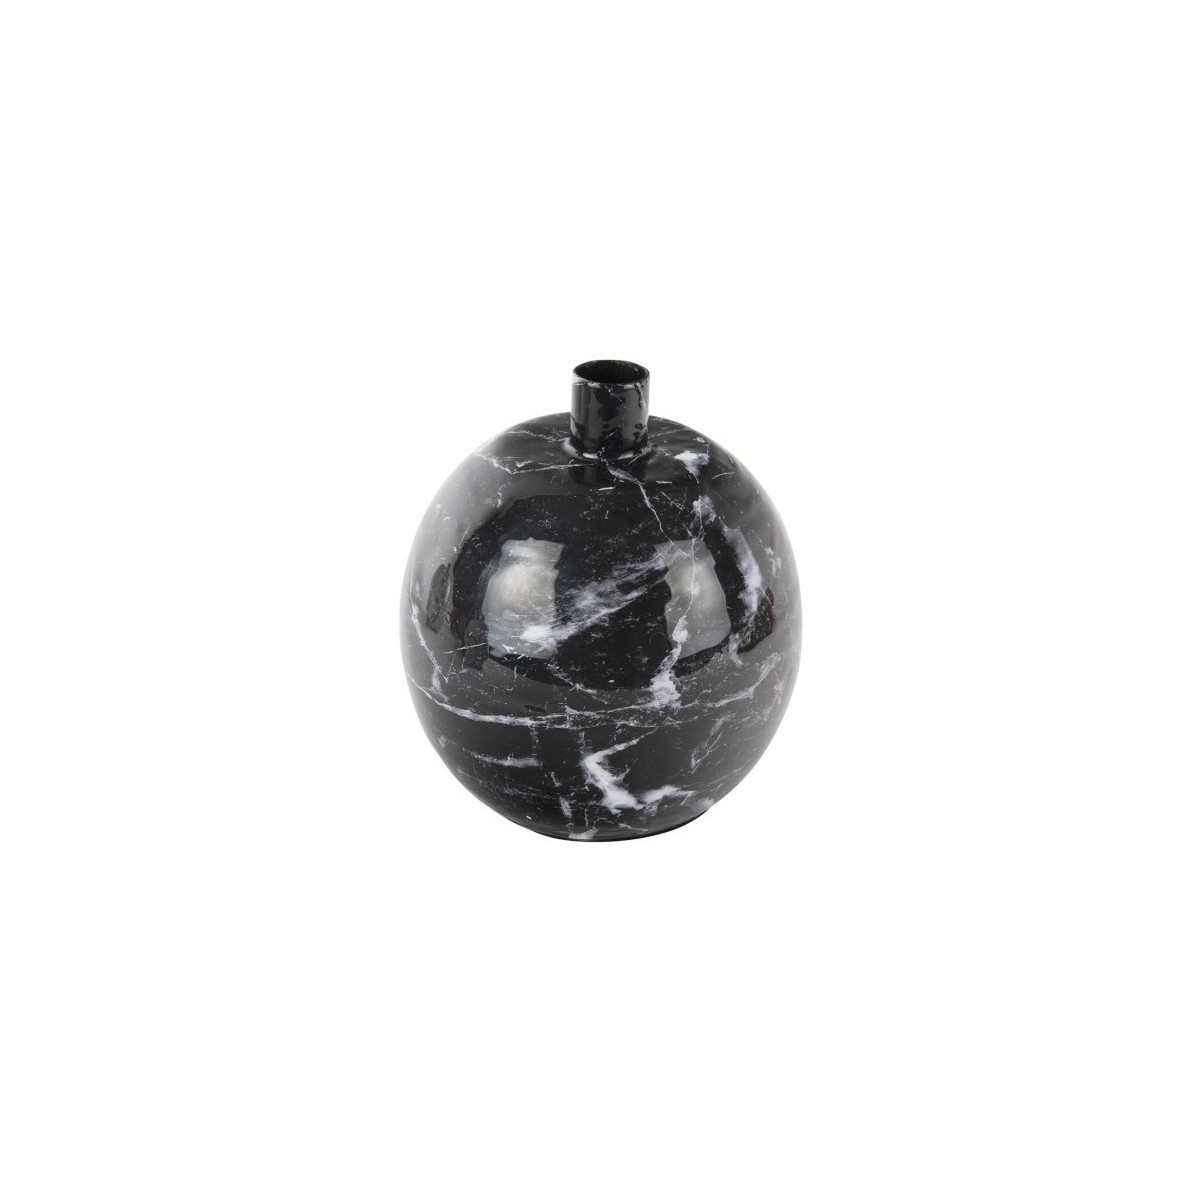 Home Candlesticks / tealights Present Time MARBLE LOOK Black